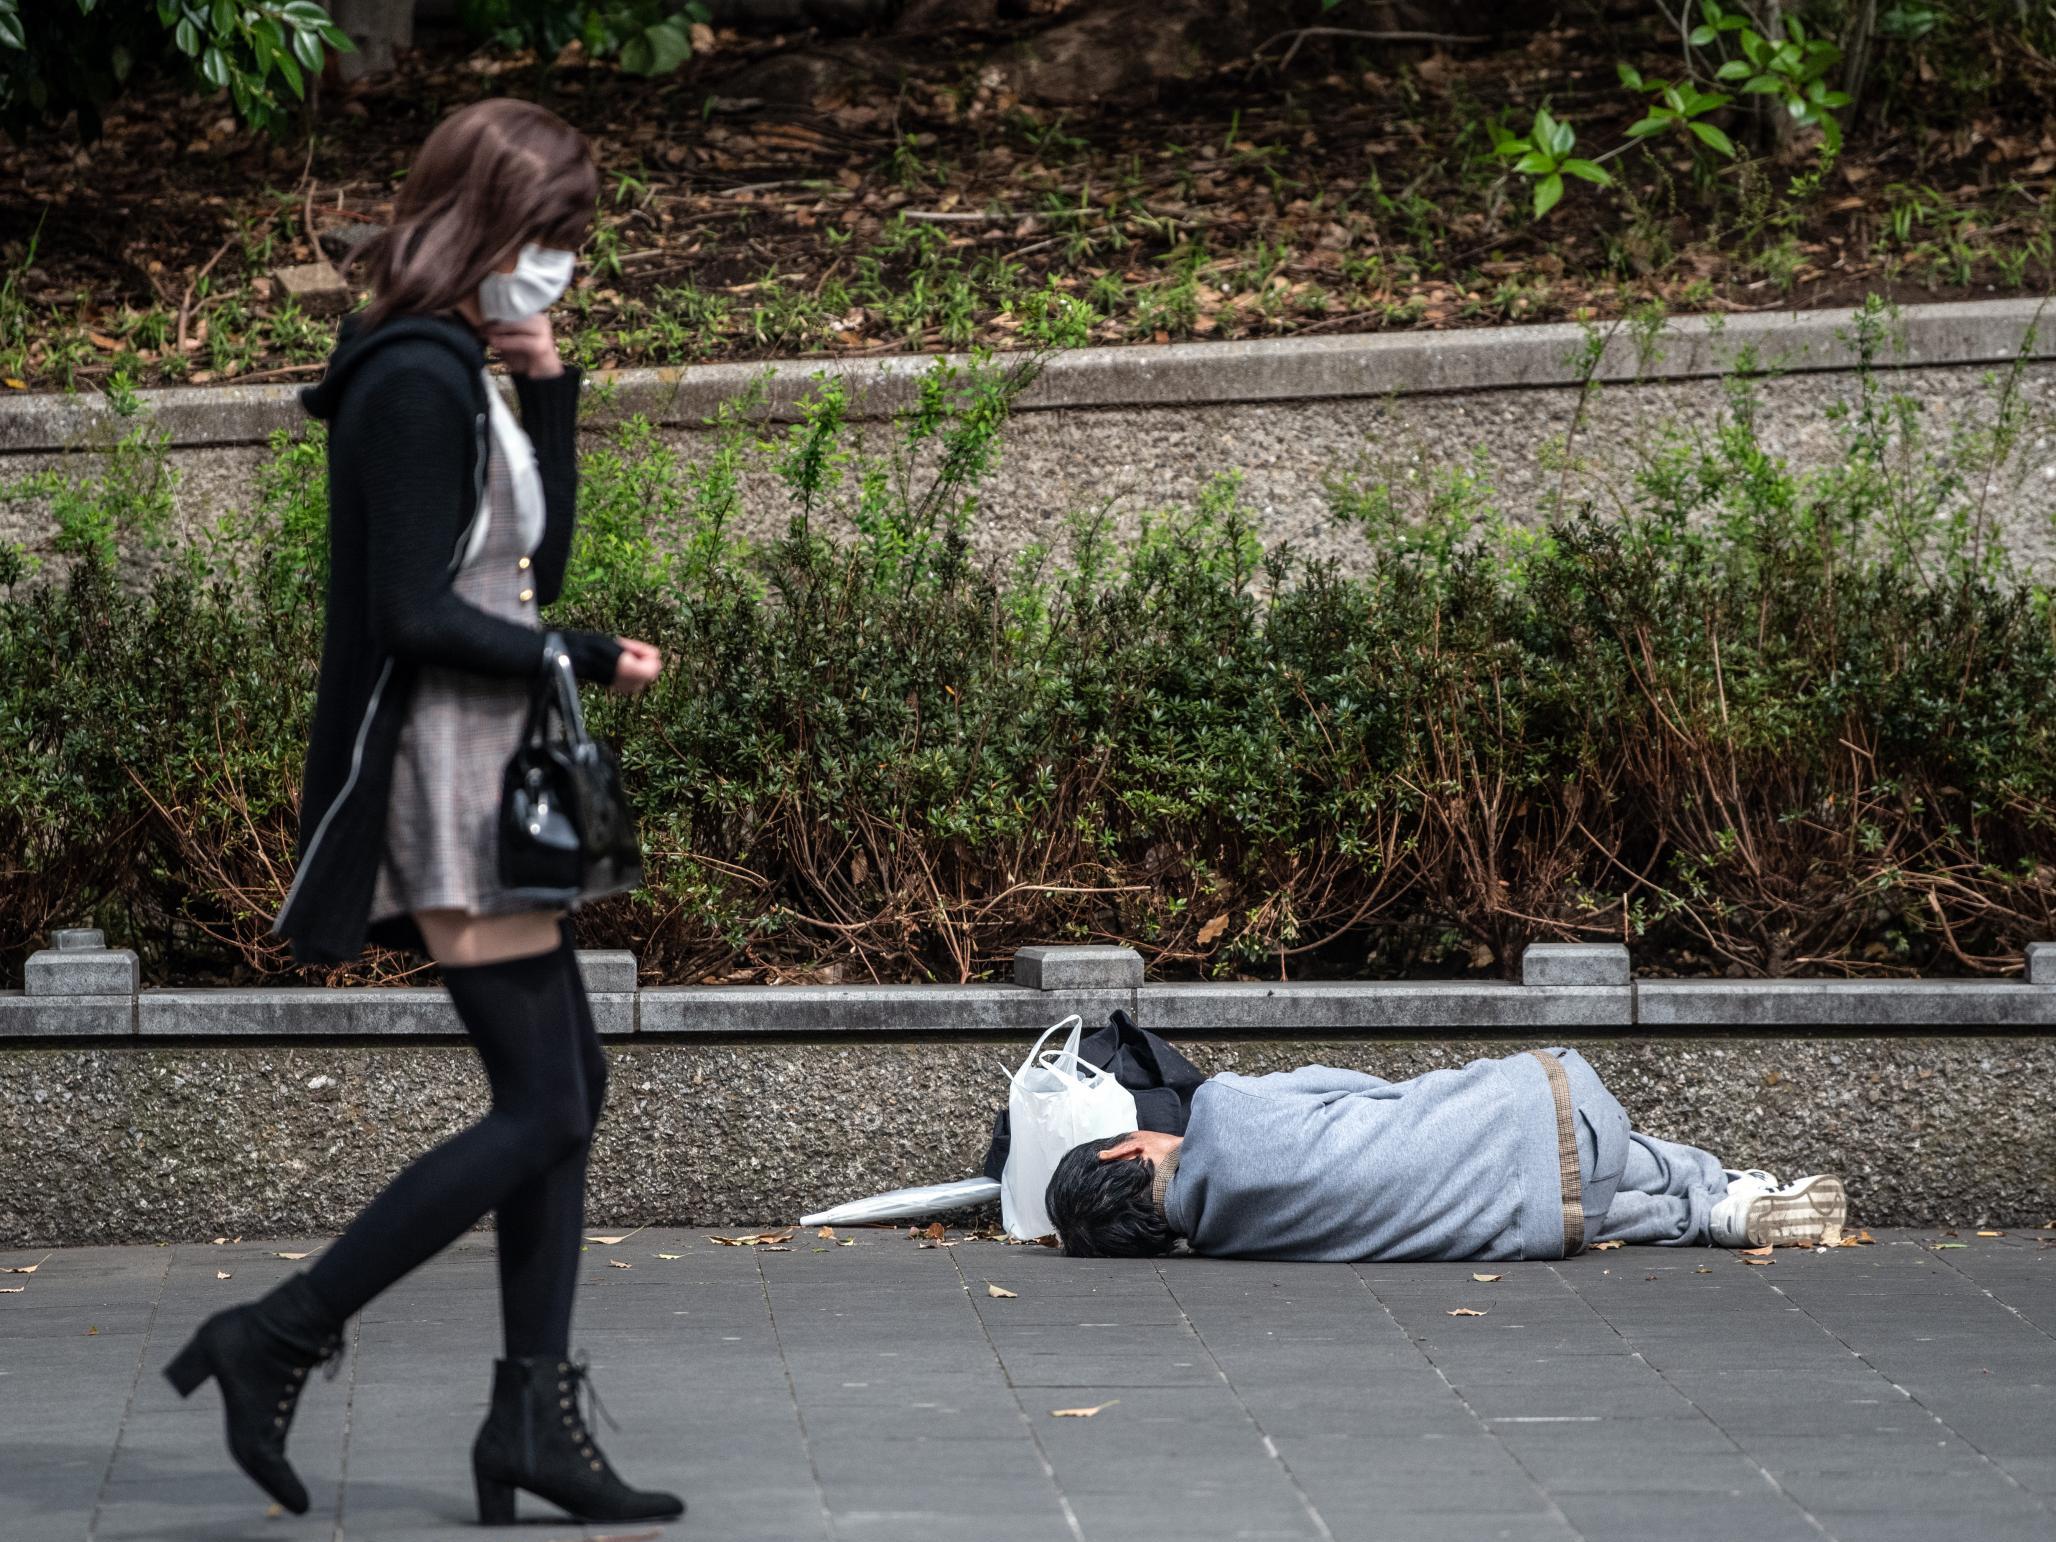 After the closure of internet cafes, Tokyo is experiencing an increase in homelessness